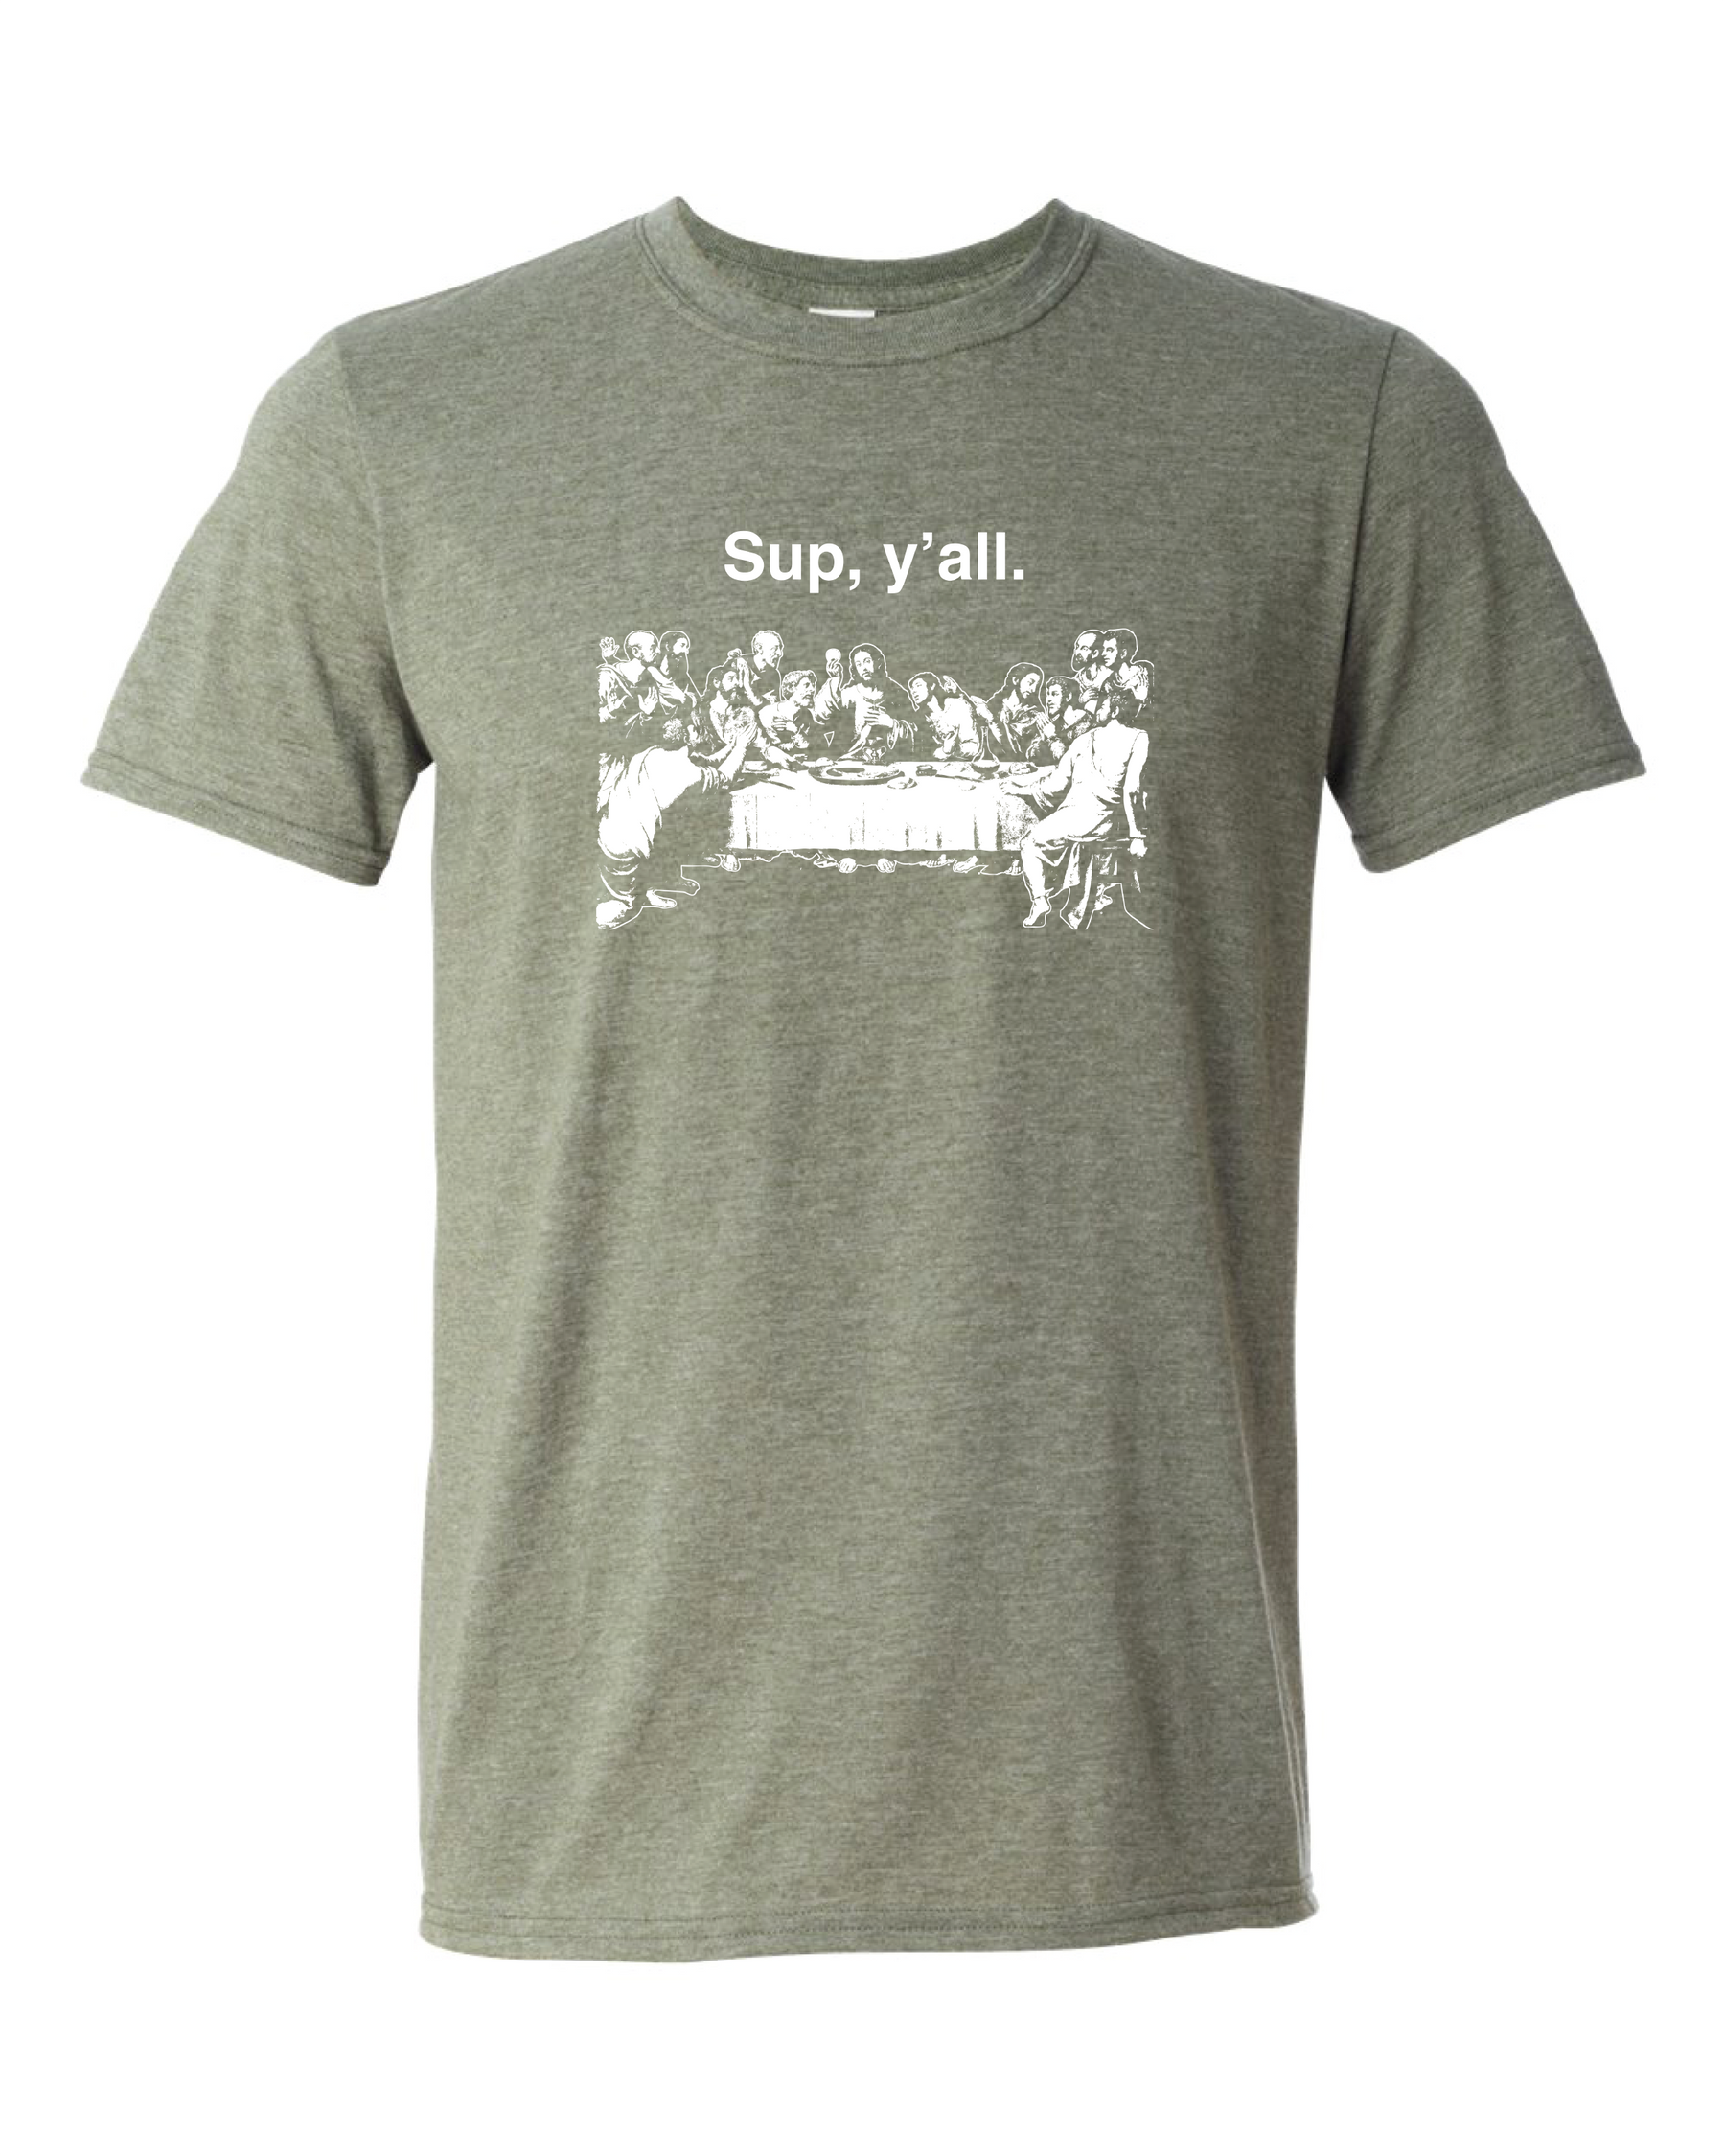 Sup y'all - Last Supper T Shirt